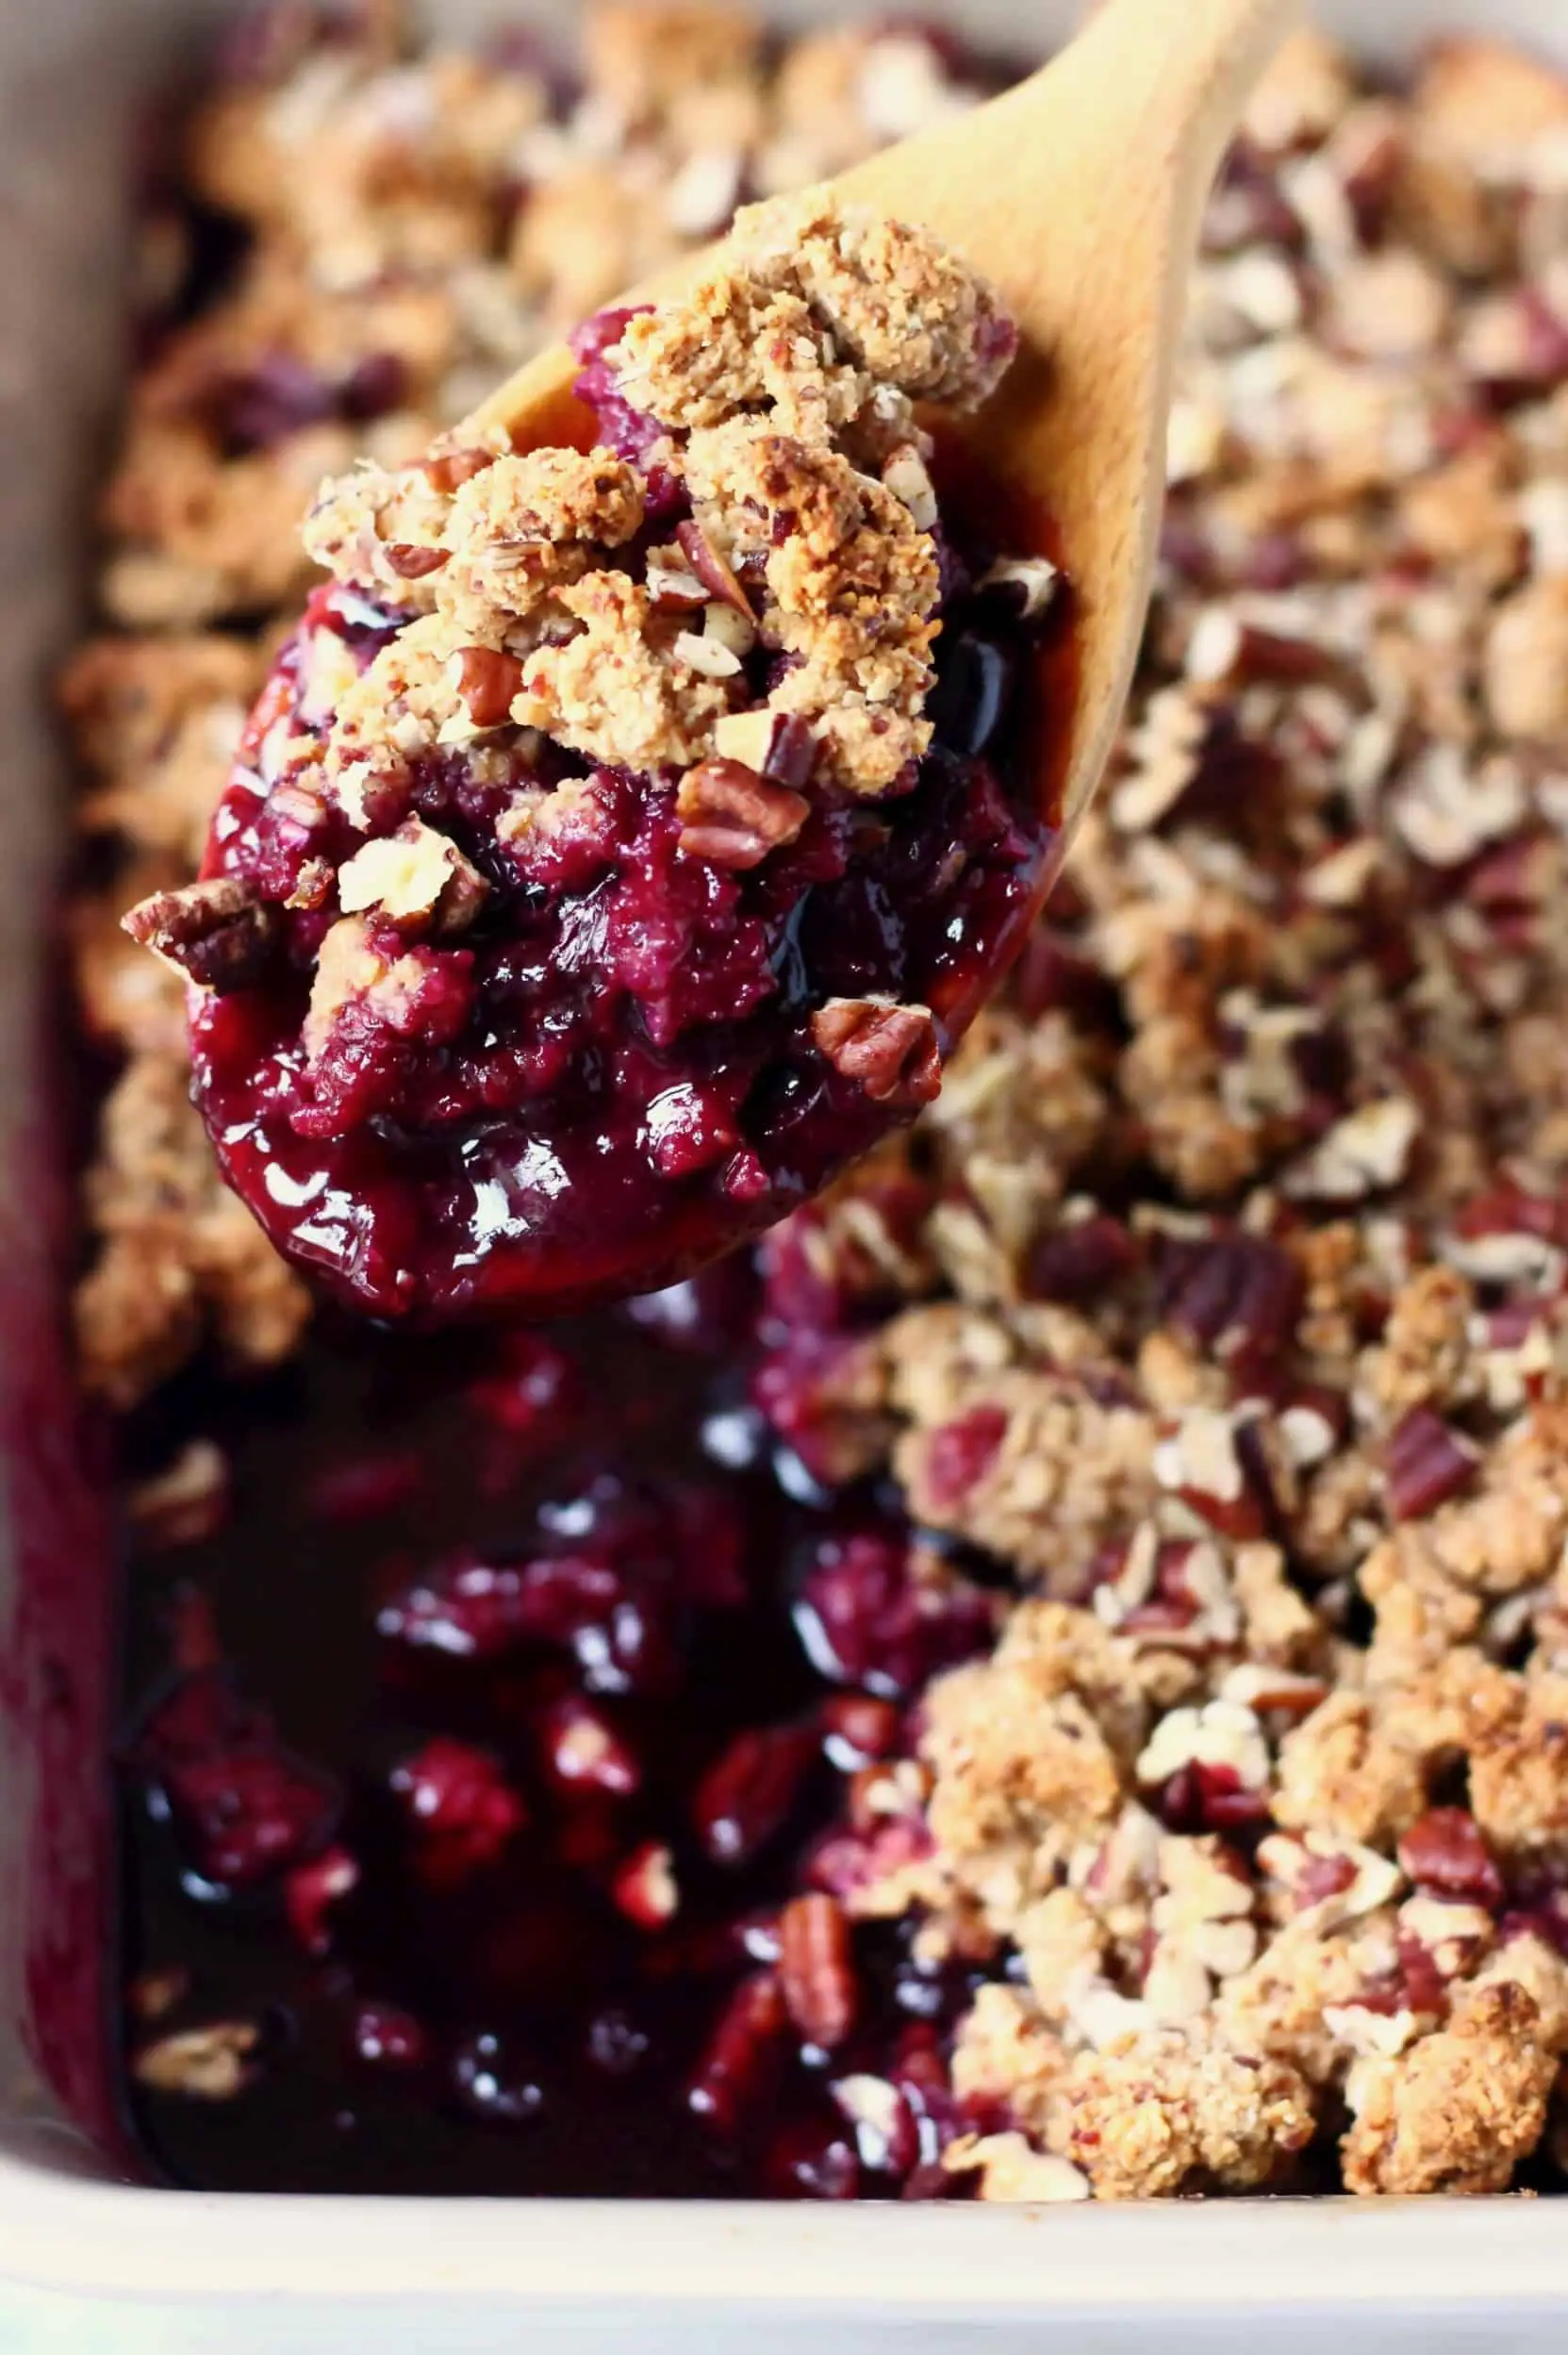 A grey rectangular baking dish of blueberry crisp with a wooden spoon lifting up a mouthful of it